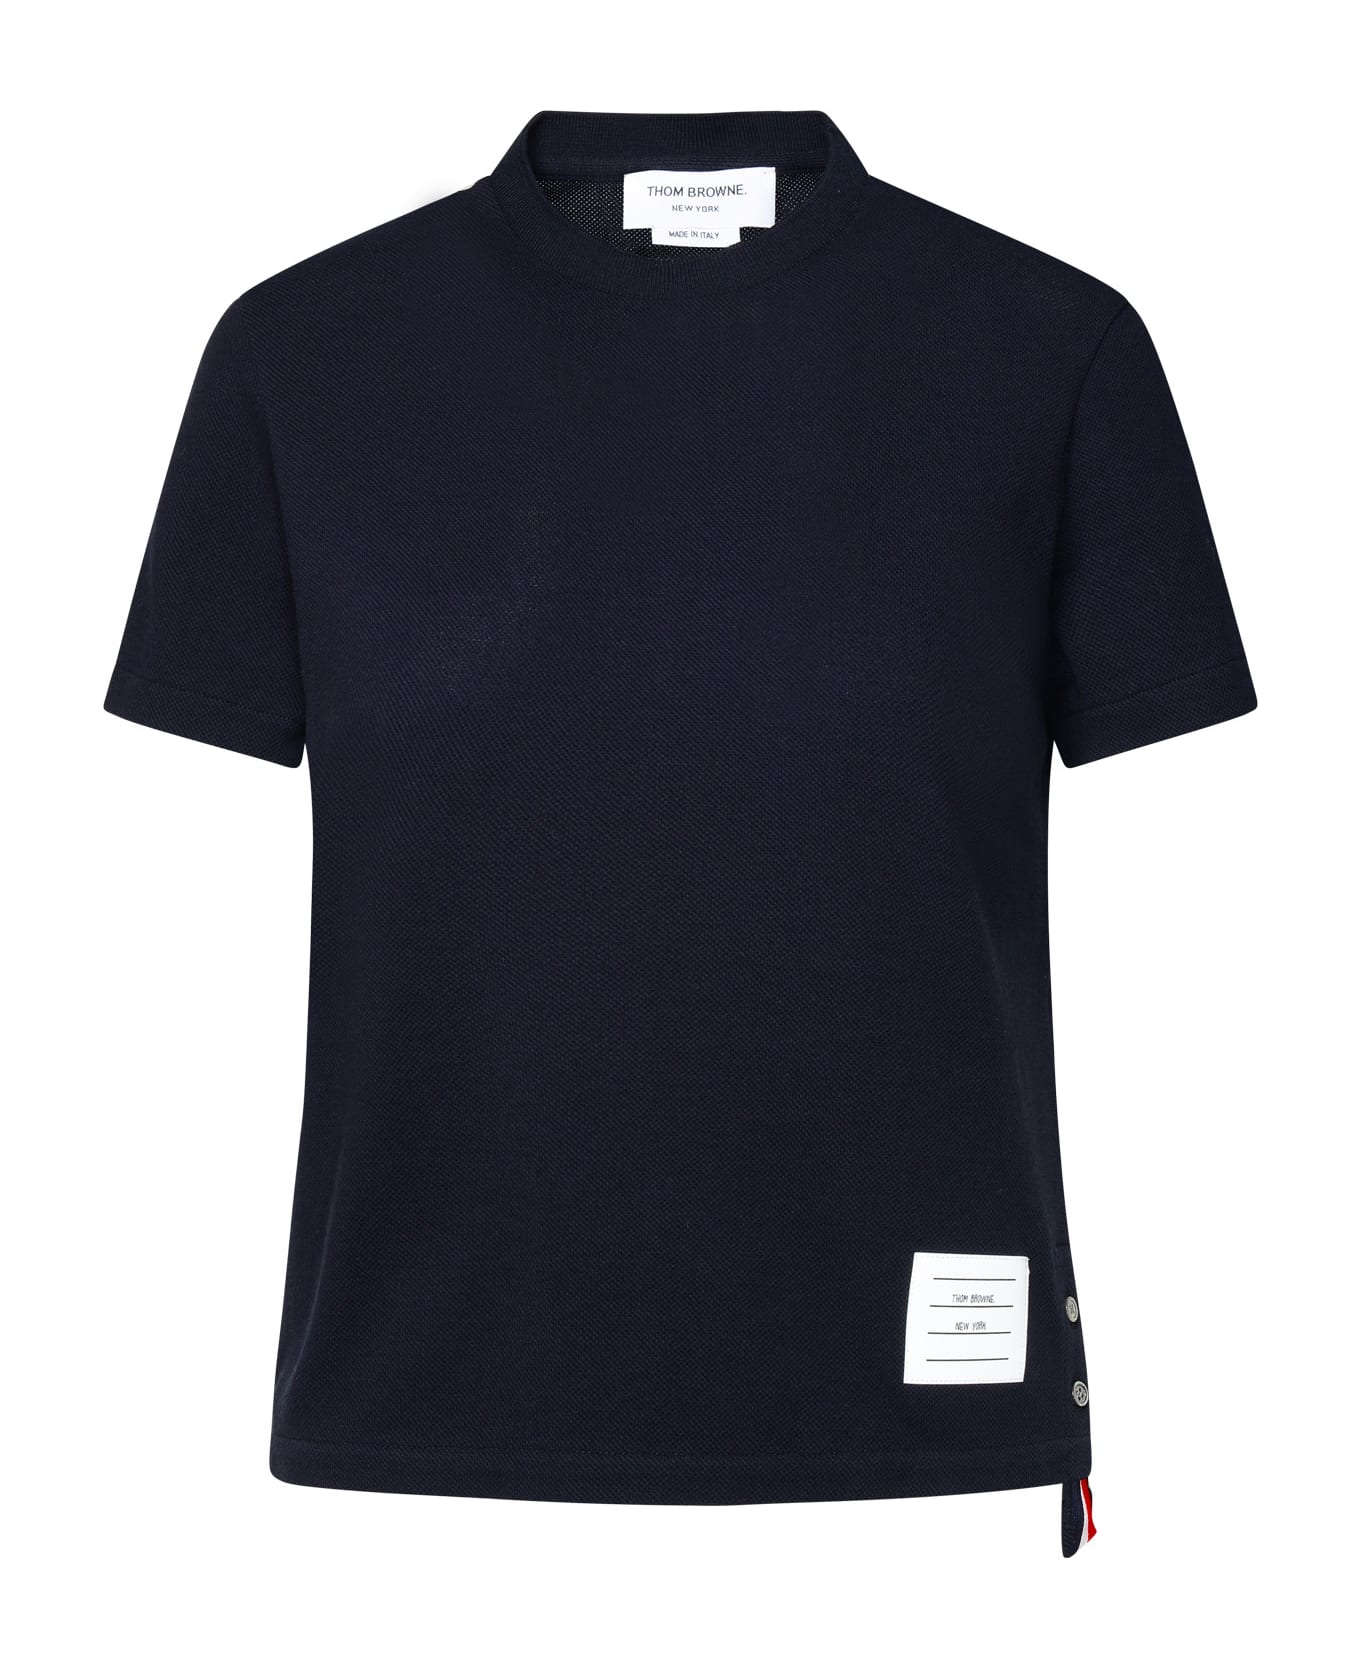 Thom Browne 'relaxed' Navy Textured Cotton T-shirt - BLUE Tシャツ